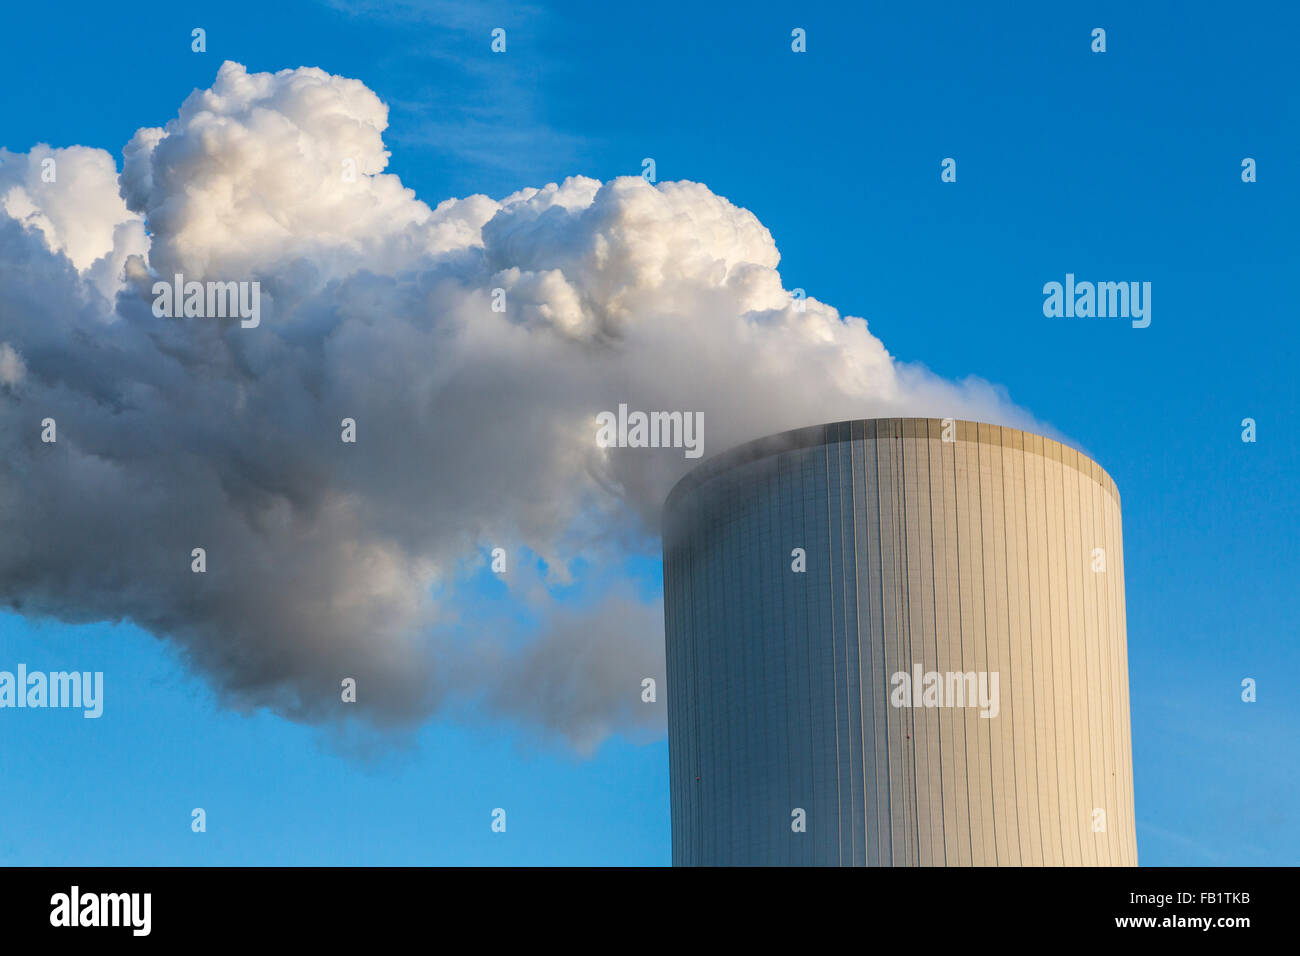 STEAG coal power plant Walsum, near Duisburg on the Rhine, the cooling tower of Block 10, Stock Photo